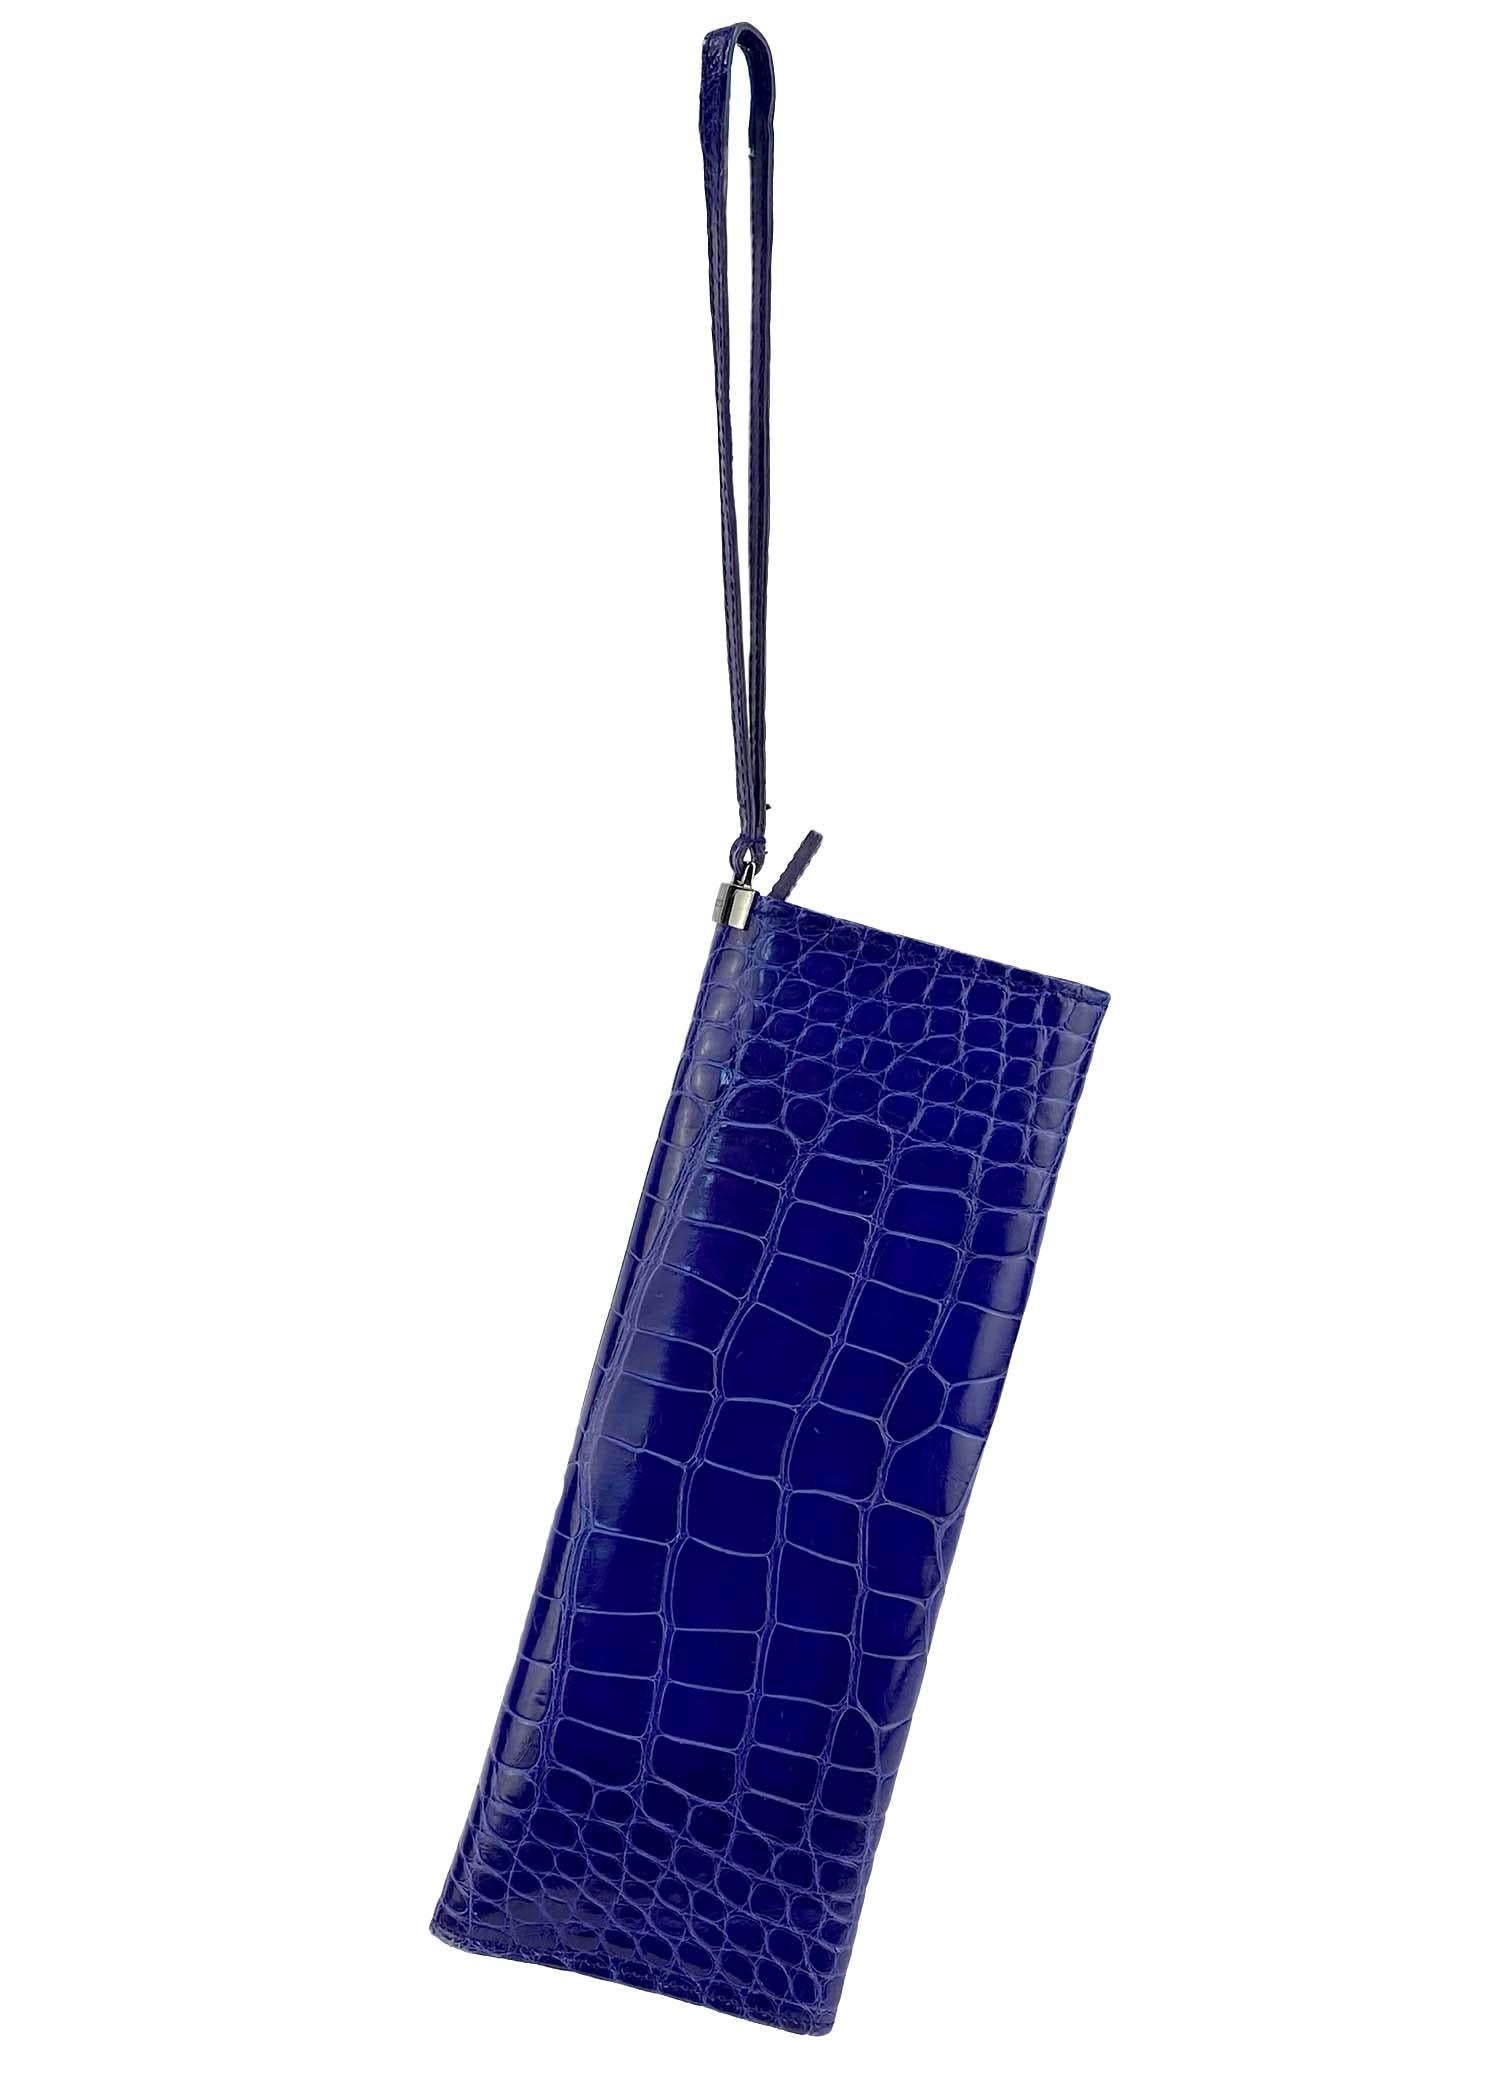 Presenting a striking alligator wristlet clutch designed by Tom Ford for Gucci's Spring/Summer 2001 collection. The rich purple color was heavily featured in the season's runway presentation and the sleek design mirrors the collection's minimalist